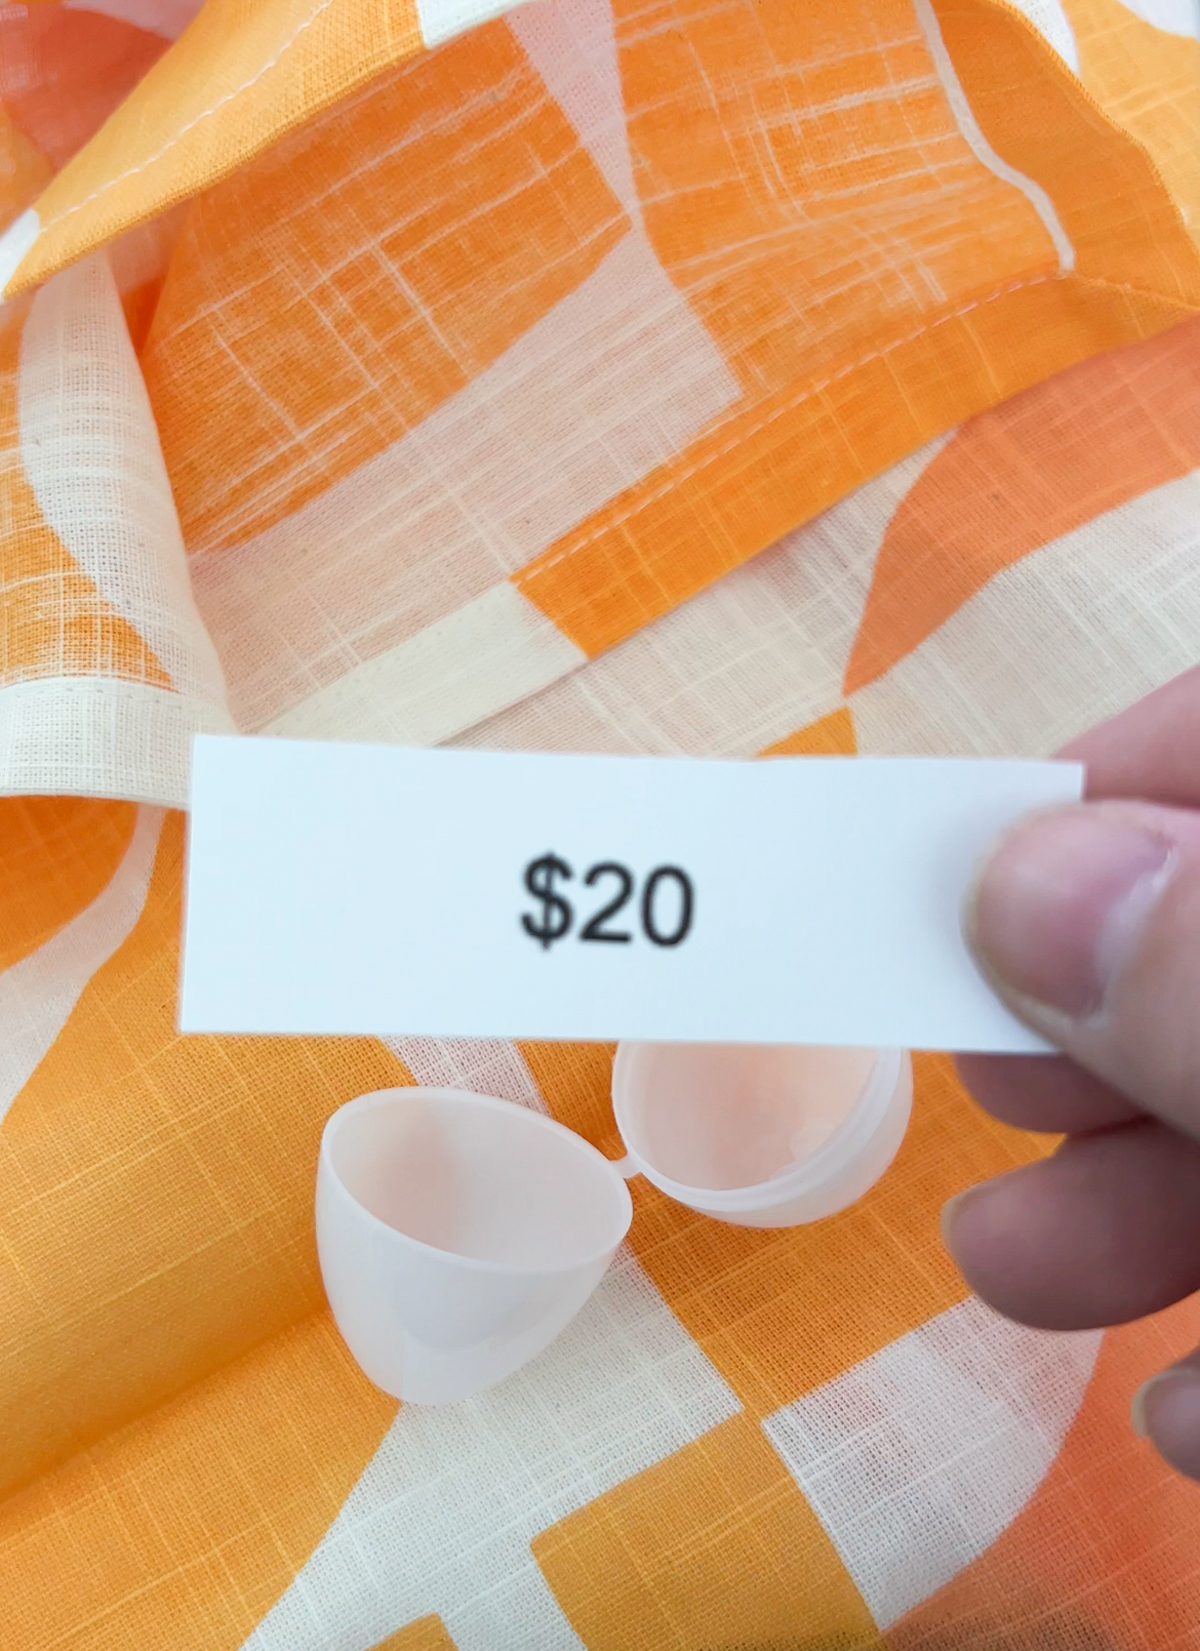 piece of paper that says $20 above a plastic egg